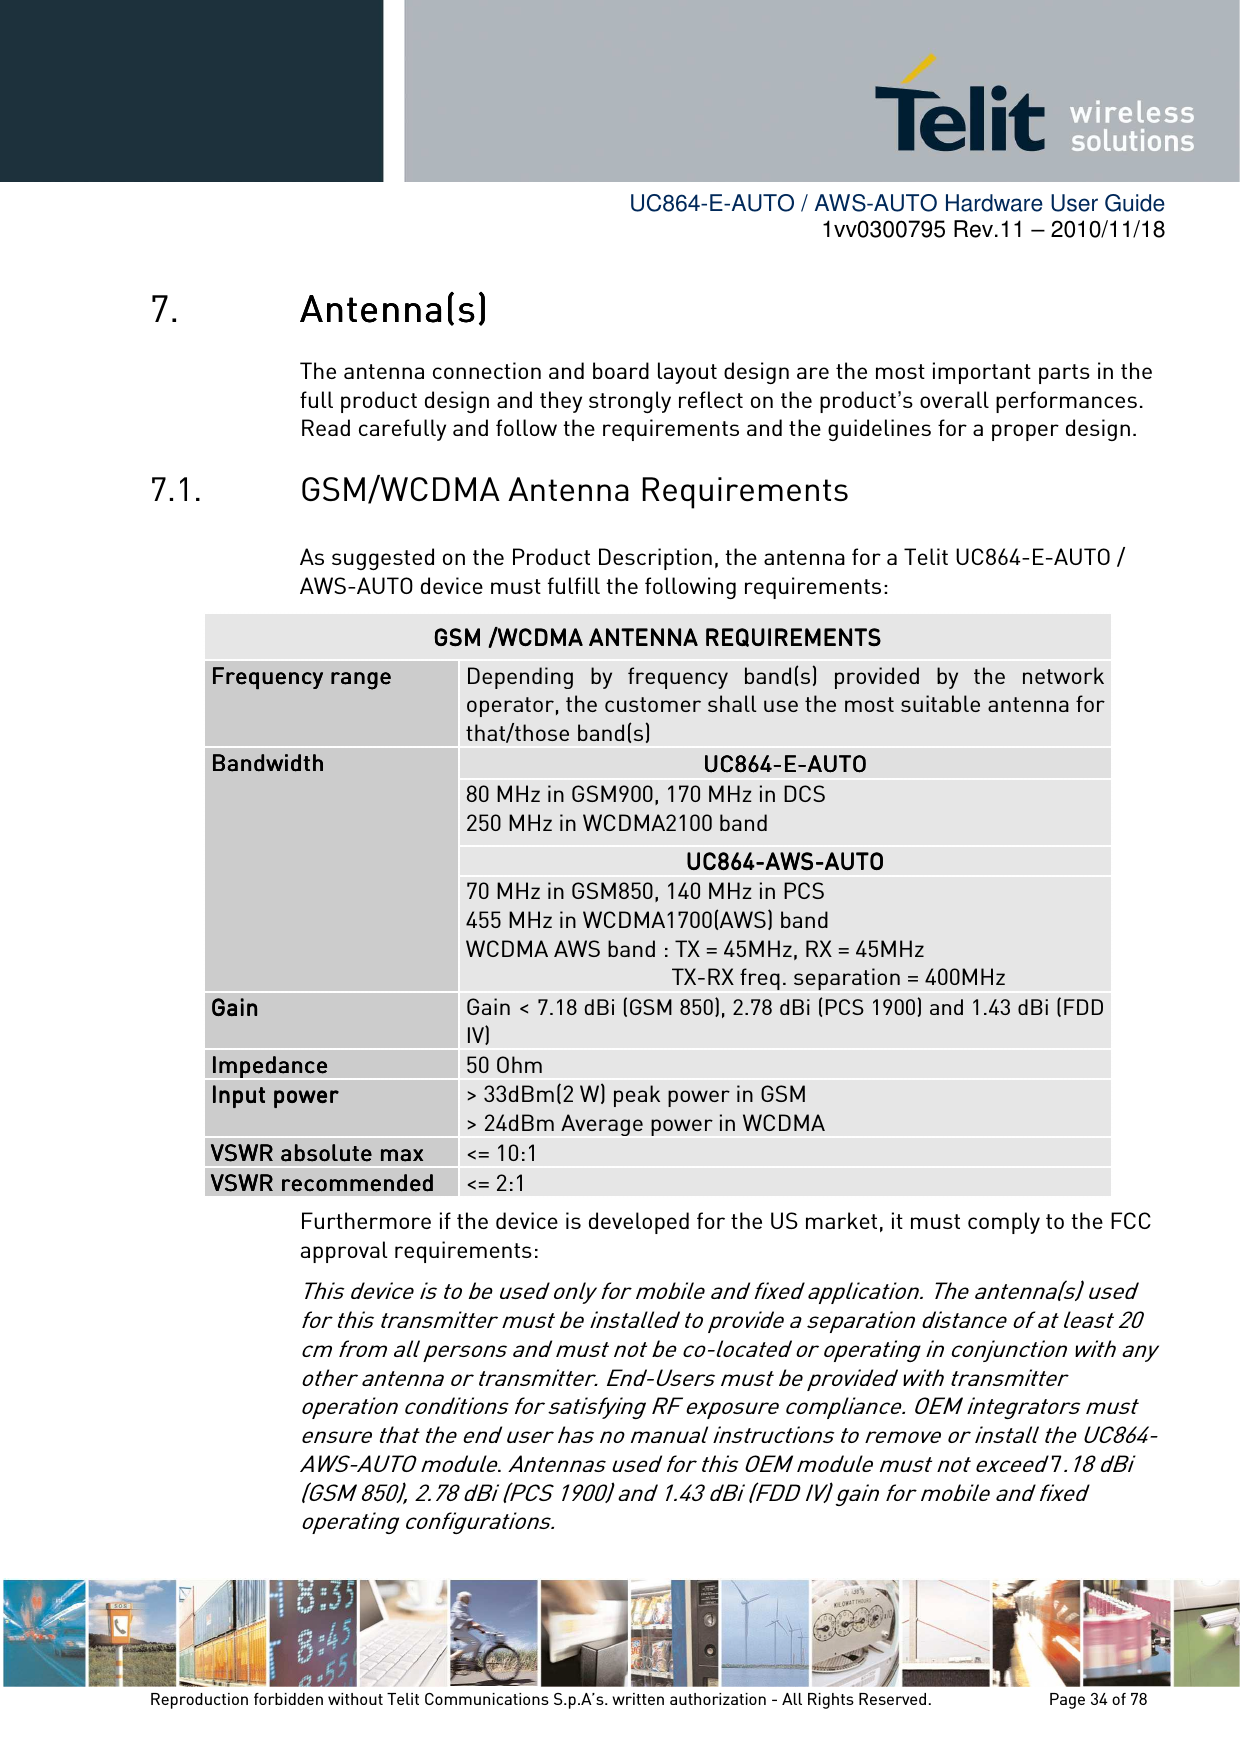        UC864-E-AUTO / AWS-AUTO Hardware User Guide 1vv0300795 Rev.11 – 2010/11/18     Reproduction forbidden without Telit Communications S.p.A’s. written authorization - All Rights Reserved.    Page 34 of 78  7. AntennaAntennaAntennaAntenna(s)(s)(s)(s)    The antenna connection and board layout design are the most important parts in the full product design and they strongly reflect on the product’s overall performances. Read carefully and follow the requirements and the guidelines for a proper design. 7.1. GSM/WCDMA Antenna Requirements As suggested on the Product Description, the antenna for a Telit UC864-E-AUTO / AWS-AUTO device must fulfill the following requirements:             Furthermore if the device is developed for the US market, it must comply to the FCC approval requirements: This device is to be used only for mobile and fixed application. The antenna(s) used for this transmitter must be installed to provide a separation distance of at least 20 cm from all persons and must not be co-located or operating in conjunction with any other antenna or transmitter. End-Users must be provided with transmitter operation conditions for satisfying RF exposure compliance. OEM integrators must ensure that the end user has no manual instructions to remove or install the UC864-AWS-AUTO module. Antennas used for this OEM module must not exceed 7.18 dBi (GSM 850), 2.78 dBi (PCS 1900) and 1.43 dBi (FDD IV) gain for mobile and fixed operating configurations. GSM /WCDMA ANTENNA REQUIREMENTSGSM /WCDMA ANTENNA REQUIREMENTSGSM /WCDMA ANTENNA REQUIREMENTSGSM /WCDMA ANTENNA REQUIREMENTS    Frequency rangeFrequency rangeFrequency rangeFrequency range     Depending  by  frequency  band(s)  provided  by  the  network operator, the customer shall use the most suitable antenna for that/those band(s) BandwidthBandwidthBandwidthBandwidth    UC864UC864UC864UC864----EEEE----AUTOAUTOAUTOAUTO    80 MHz in GSM900, 170 MHz in DCS  250 MHz in WCDMA2100 band UC864UC864UC864UC864----AWSAWSAWSAWS----AUTOAUTOAUTOAUTO 70 MHz in GSM850, 140 MHz in PCS 455 MHz in WCDMA1700(AWS) band WCDMA AWS band : TX = 45MHz, RX = 45MHz                                     TX-RX freq. separation = 400MHz GainGainGainGain     Gain &lt; 7.18 dBi (GSM 850), 2.78 dBi (PCS 1900) and 1.43 dBi (FDD IV) ImpedanceImpedanceImpedanceImpedance     50 Ohm Input powerInput powerInput powerInput power     &gt; 33dBm(2 W) peak power in GSM &gt; 24dBm Average power in WCDMA VSWR absolute maxVSWR absolute maxVSWR absolute maxVSWR absolute max     &lt;= 10:1 VSWR recommendedVSWR recommendedVSWR recommendedVSWR recommended     &lt;= 2:1 